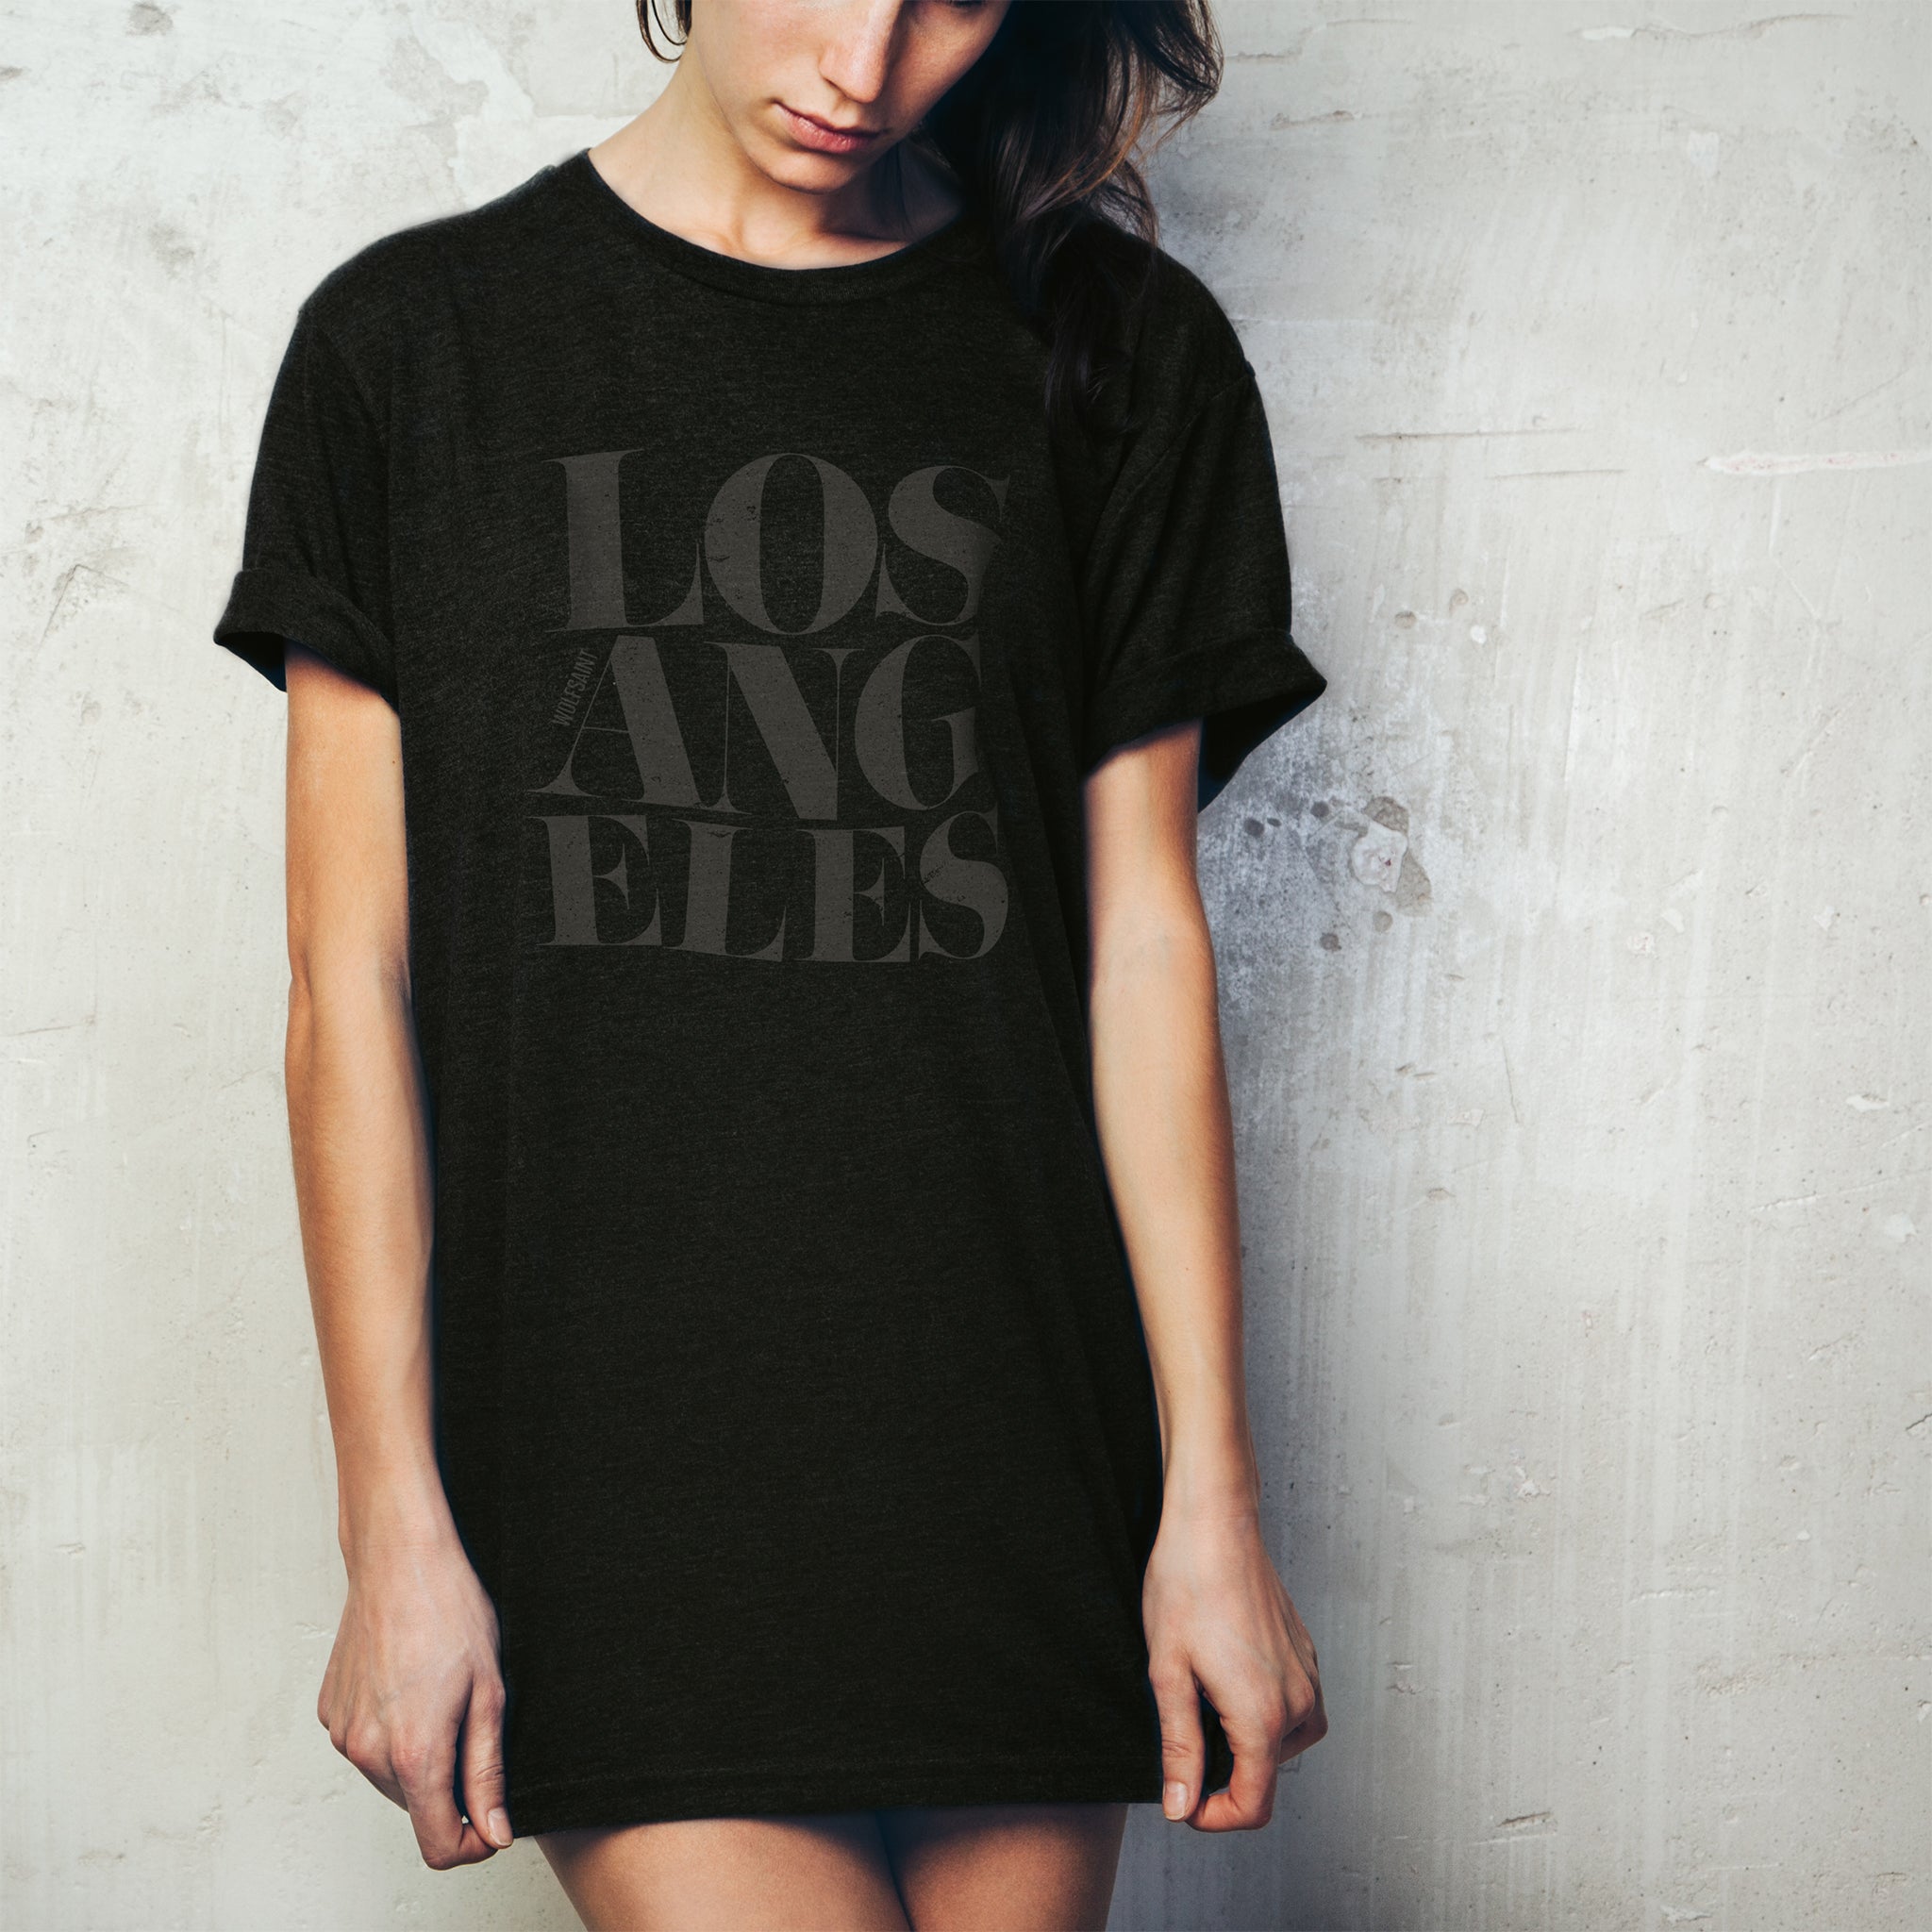 A stylish young woman wearing a fashionable black t-shirt as a shirt dress, with the word “LOS ANGELES” in a elegant font, stacked in three tilted lines to sarcastically simulate an earthquake. From wolfsaint.net